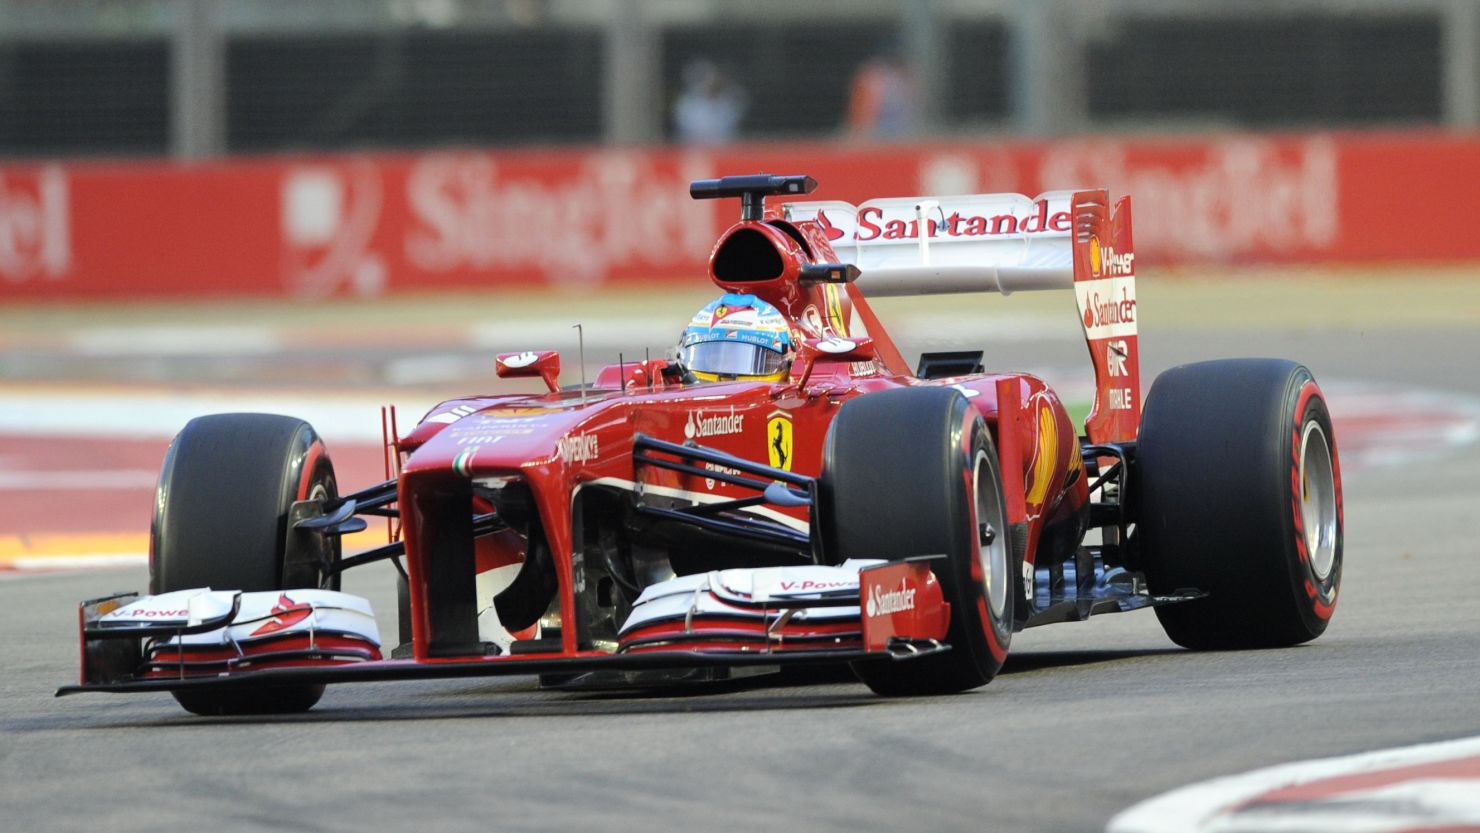 Ferrari's Fernando Alonso finished second at the Singapore Grand Prix, despite starting seventh on the grid.